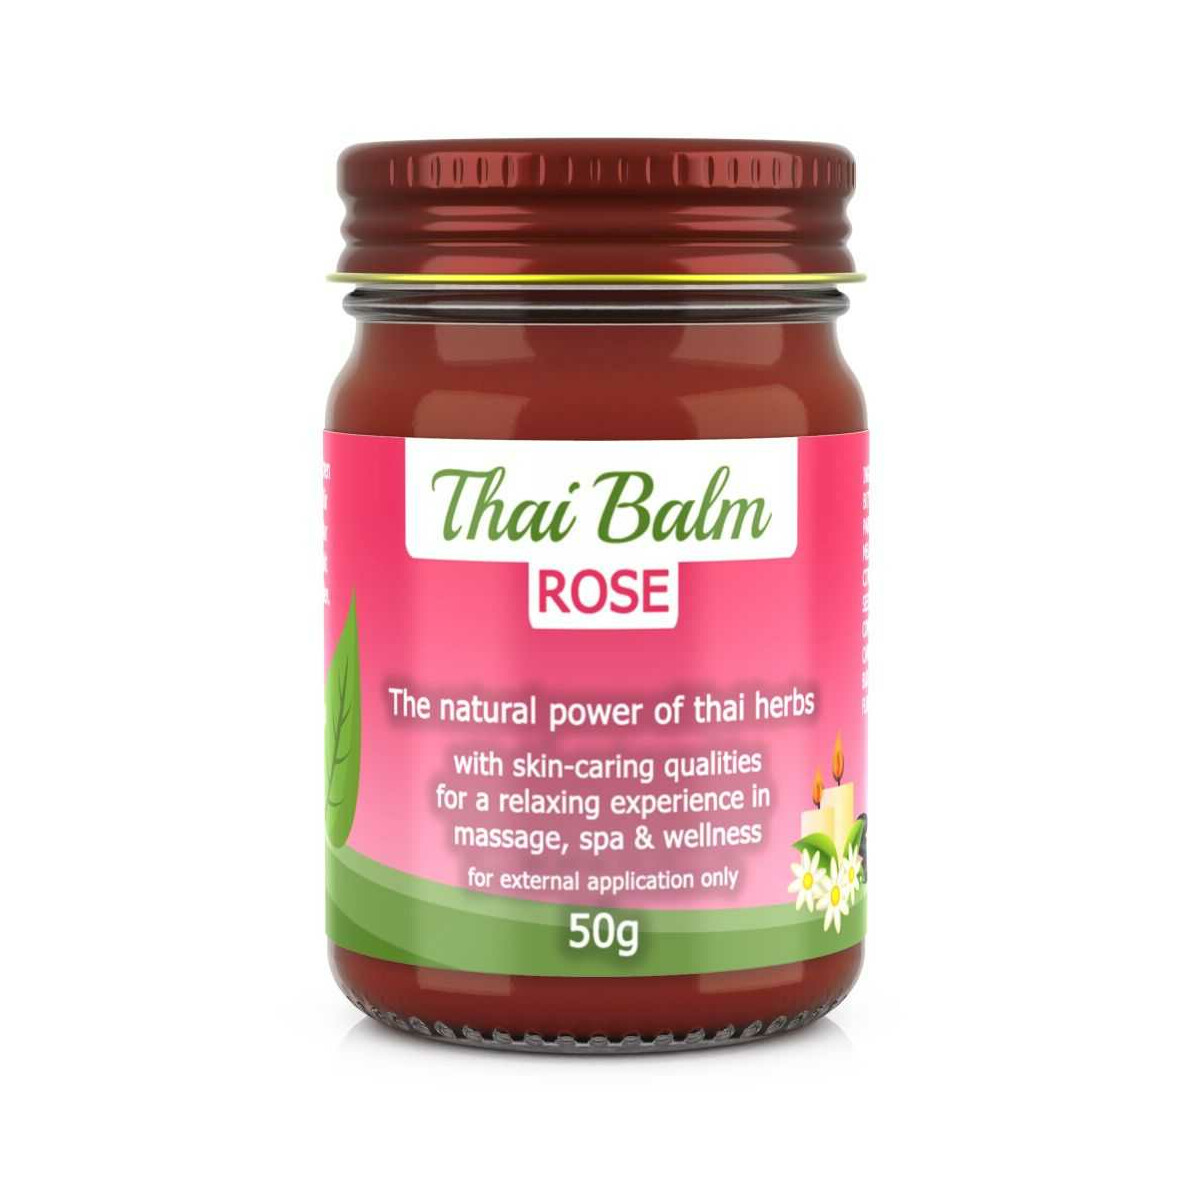 Massage Balm with Thai Herbs - Rose (Red)